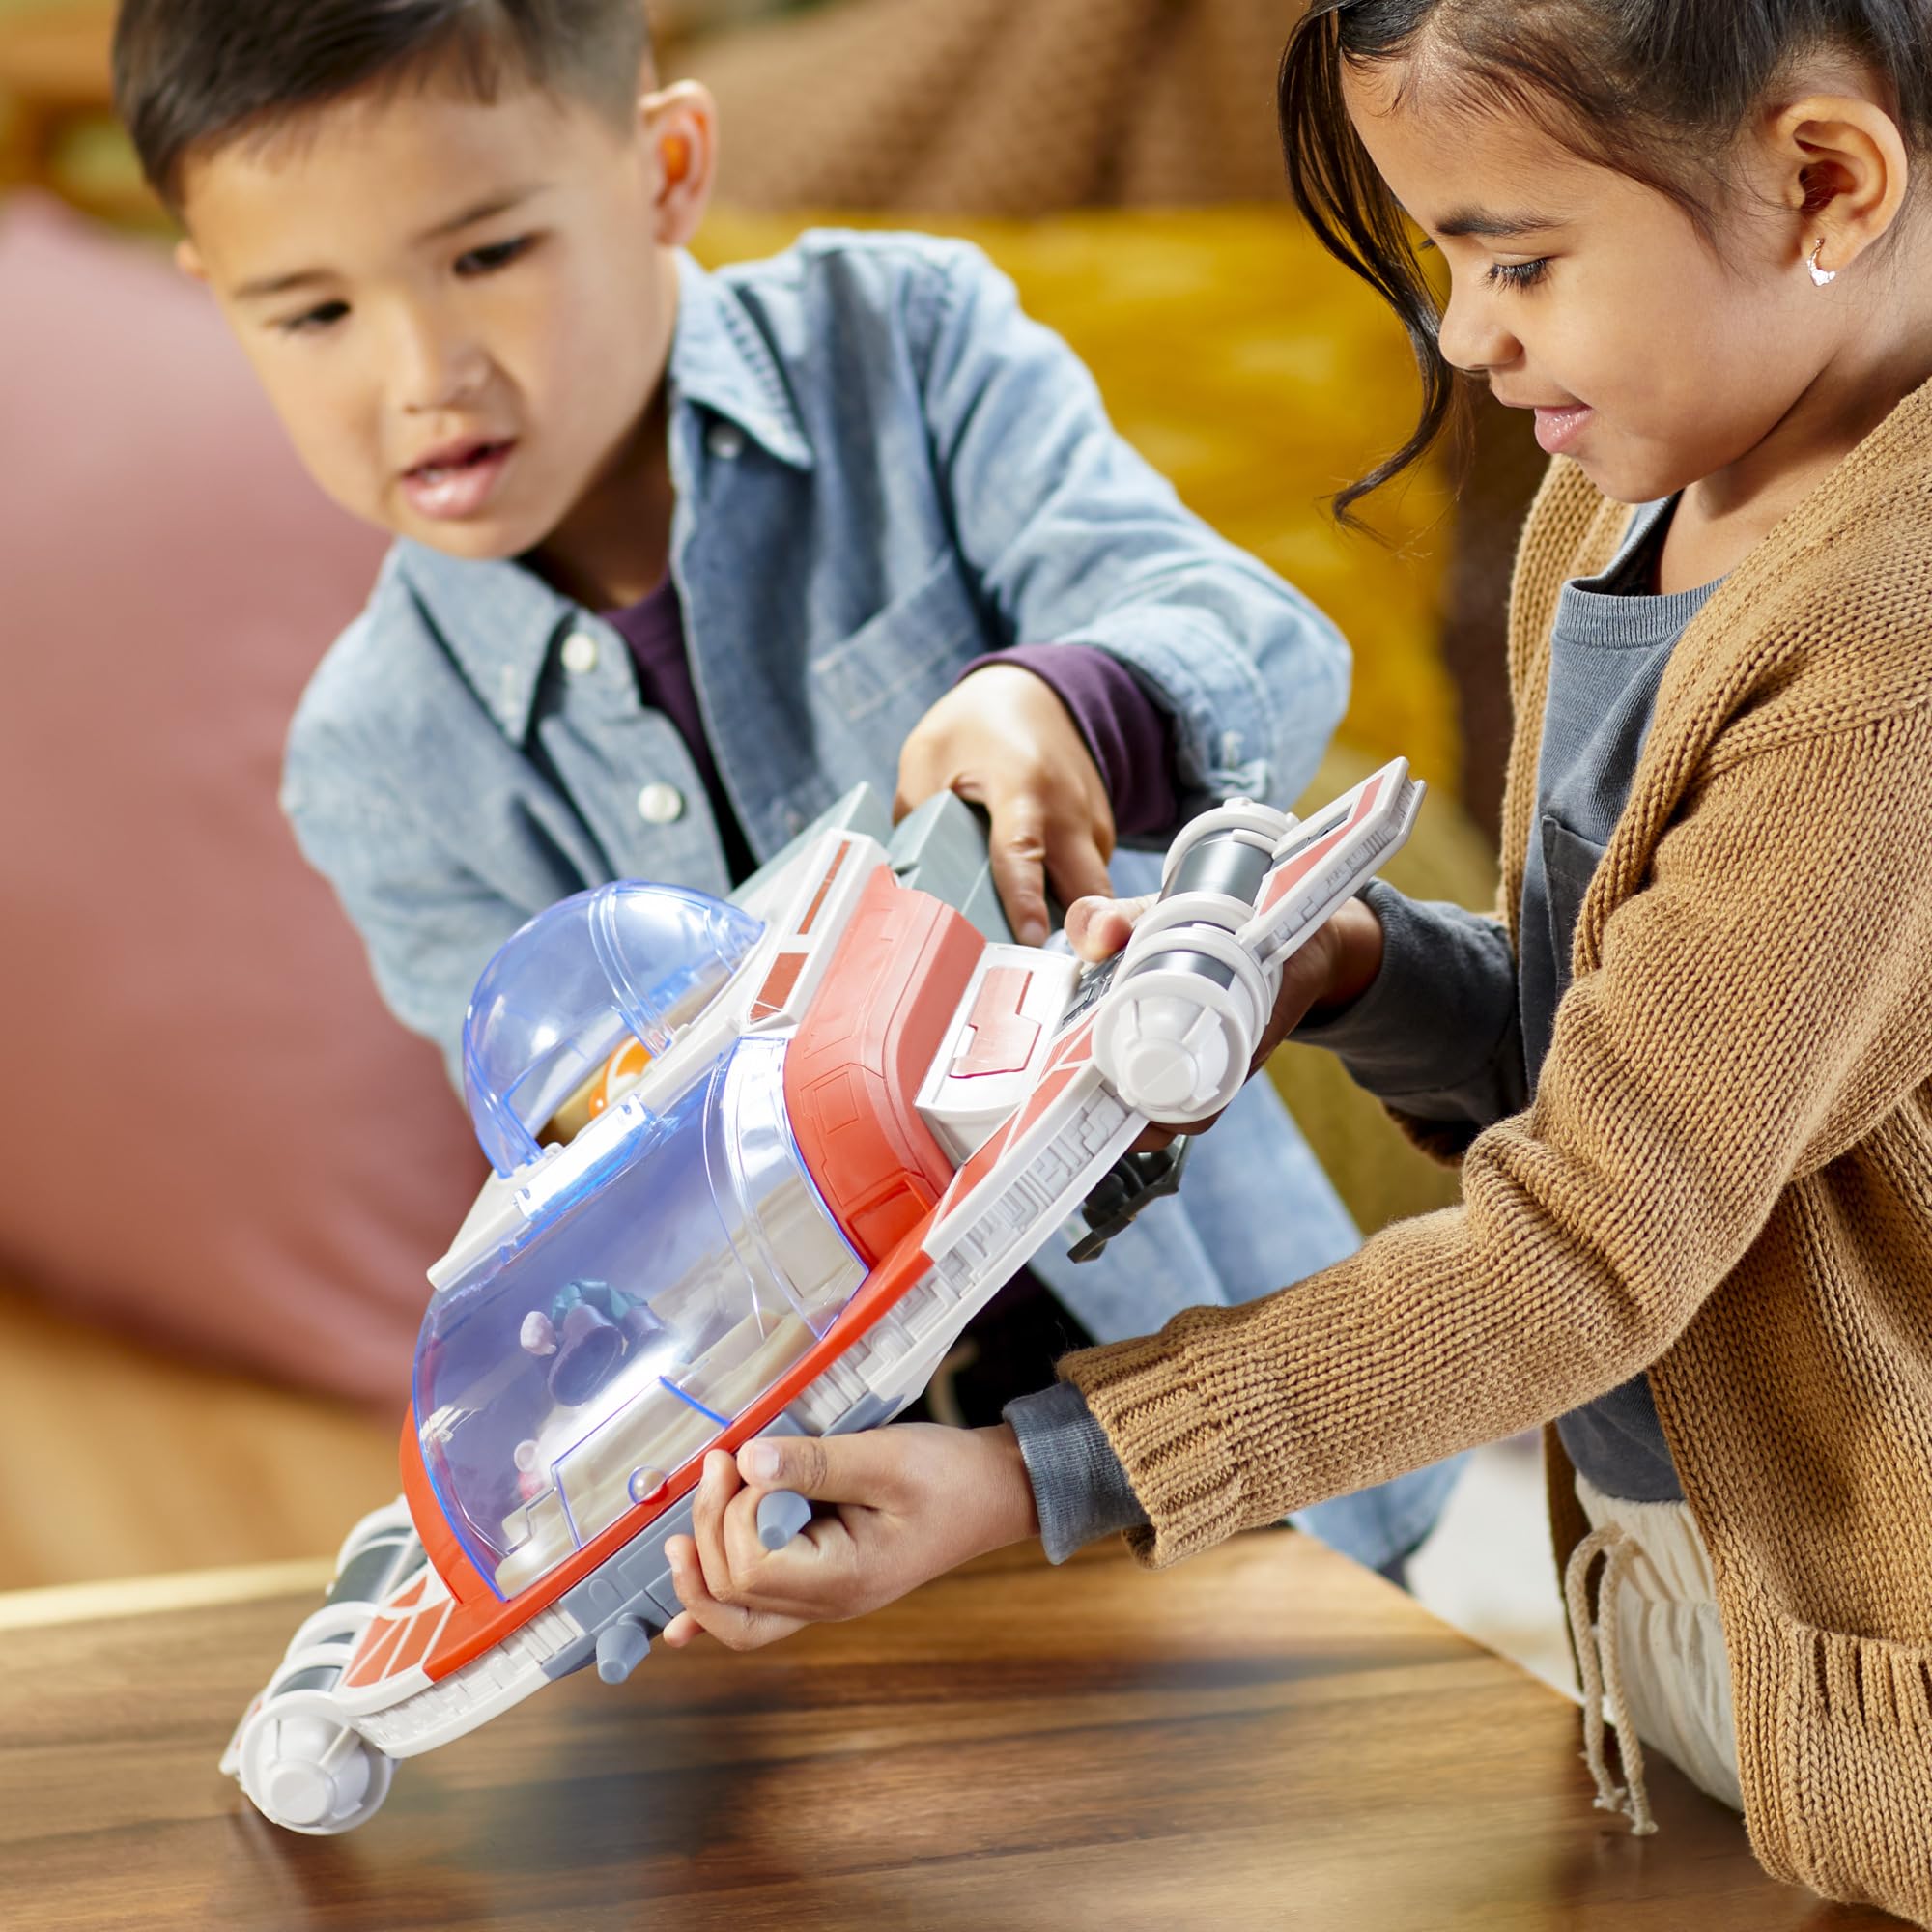 STAR WARS The Crimson Firehawk, 17-Inch Ship with 2 Action Figures, Toys, Preschool Toys for 3 Year Old Boys & Girls